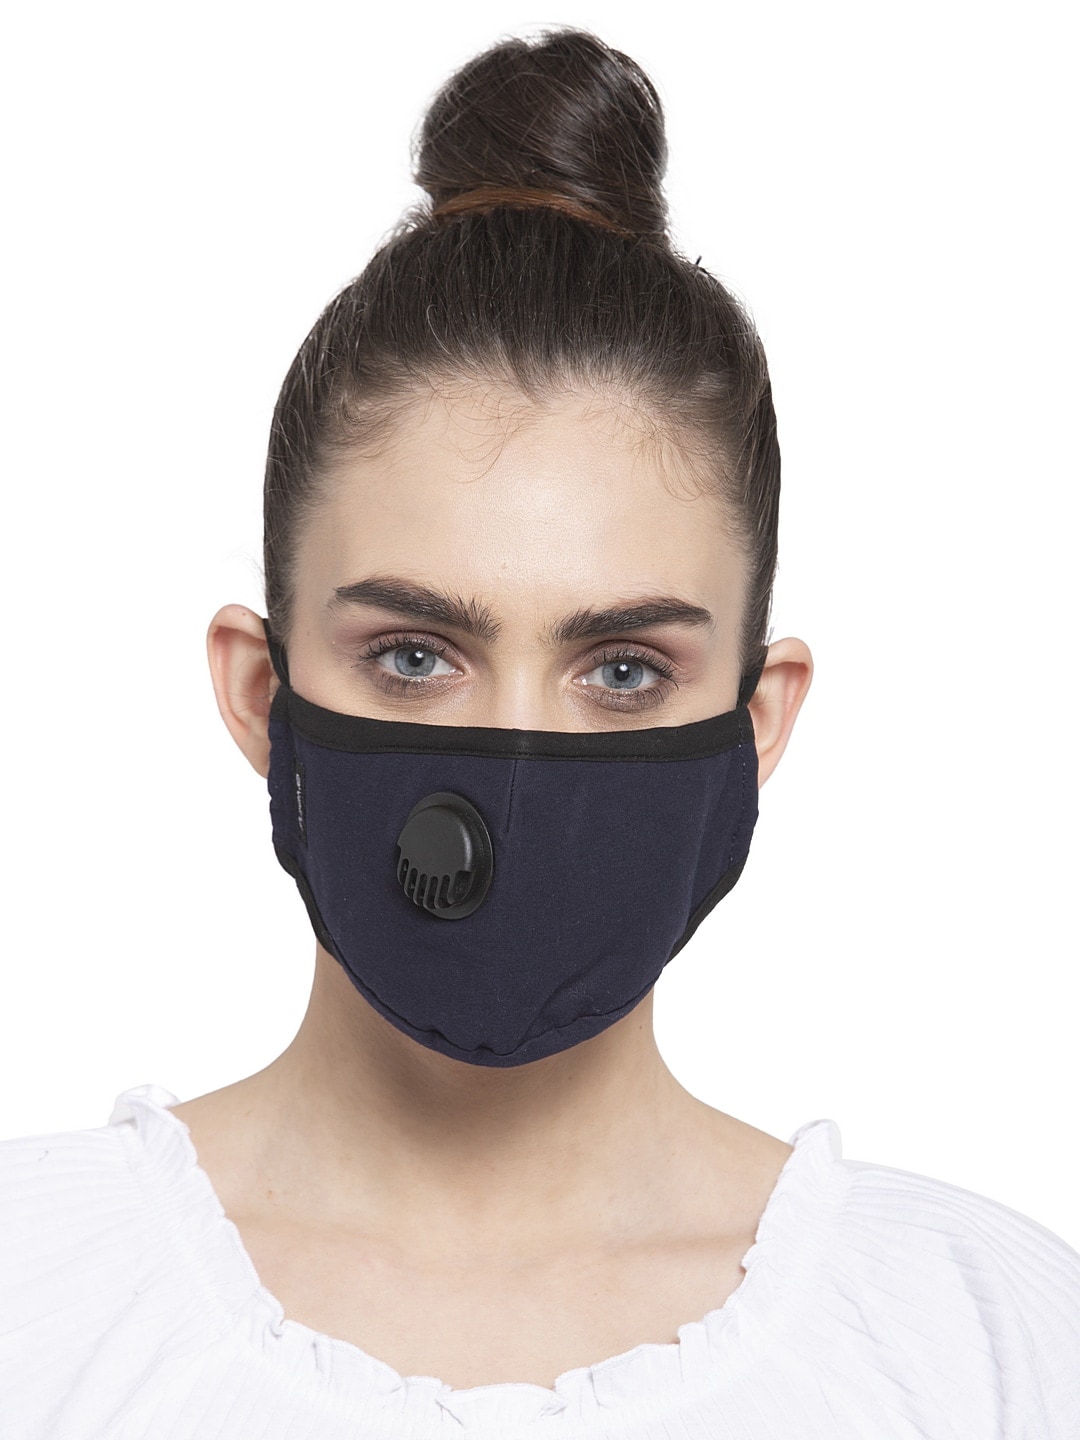 PureMe Air Masks Unisex Navy Blue Solid 5-Ply Reusable Valved Protective Outdoor Mask Price in India